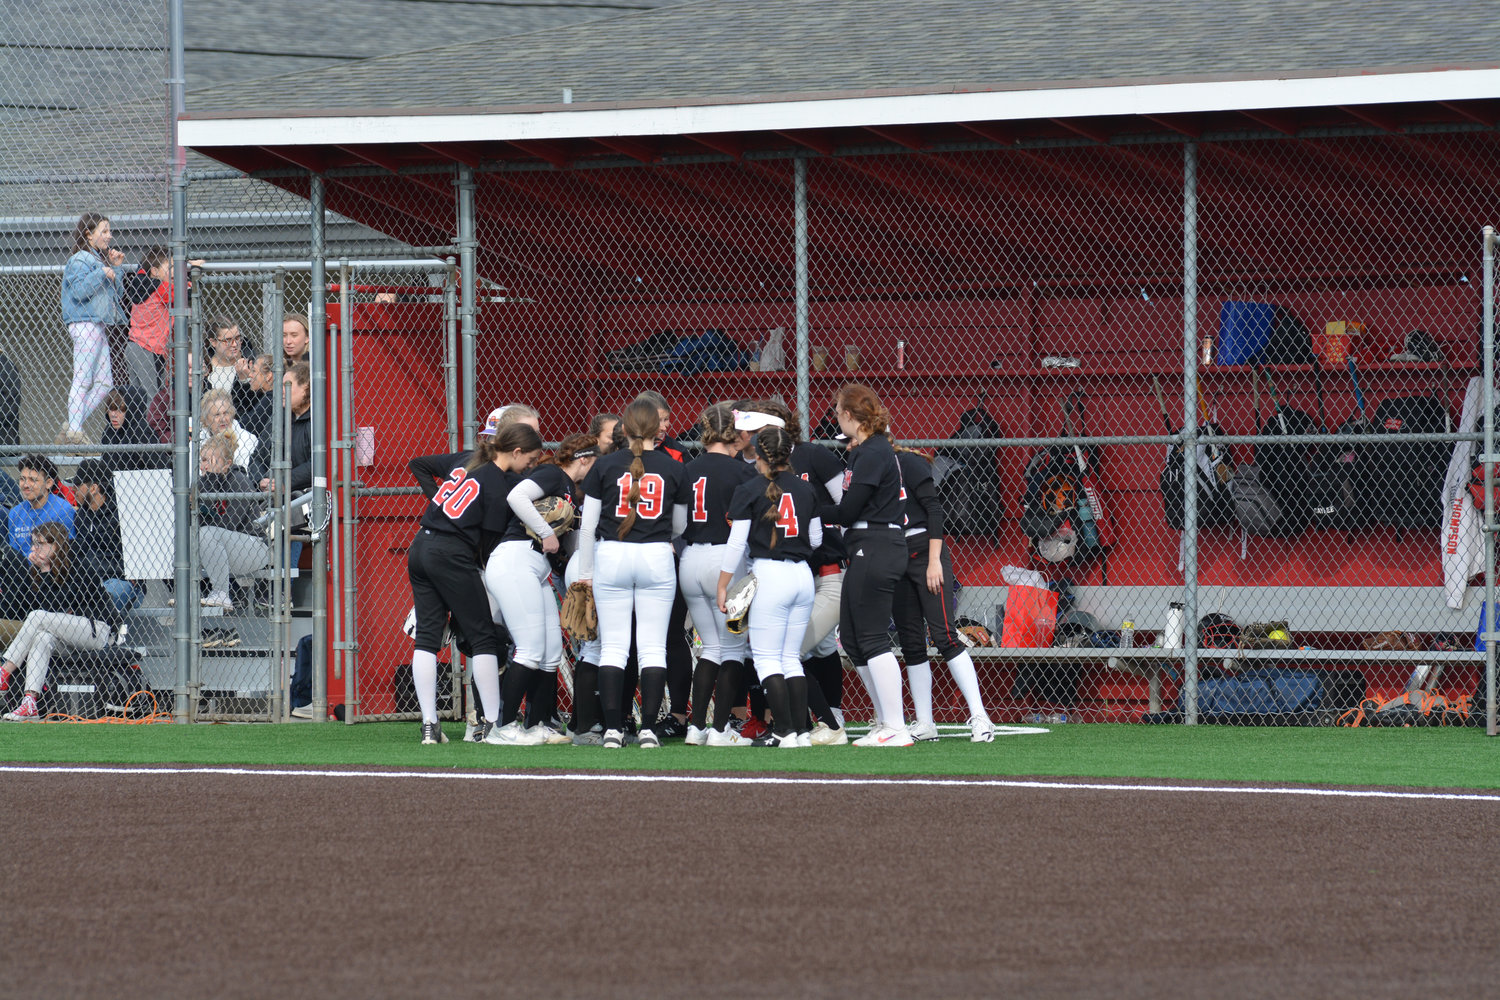 The Yelm fastpitch team huddles mid-inning.